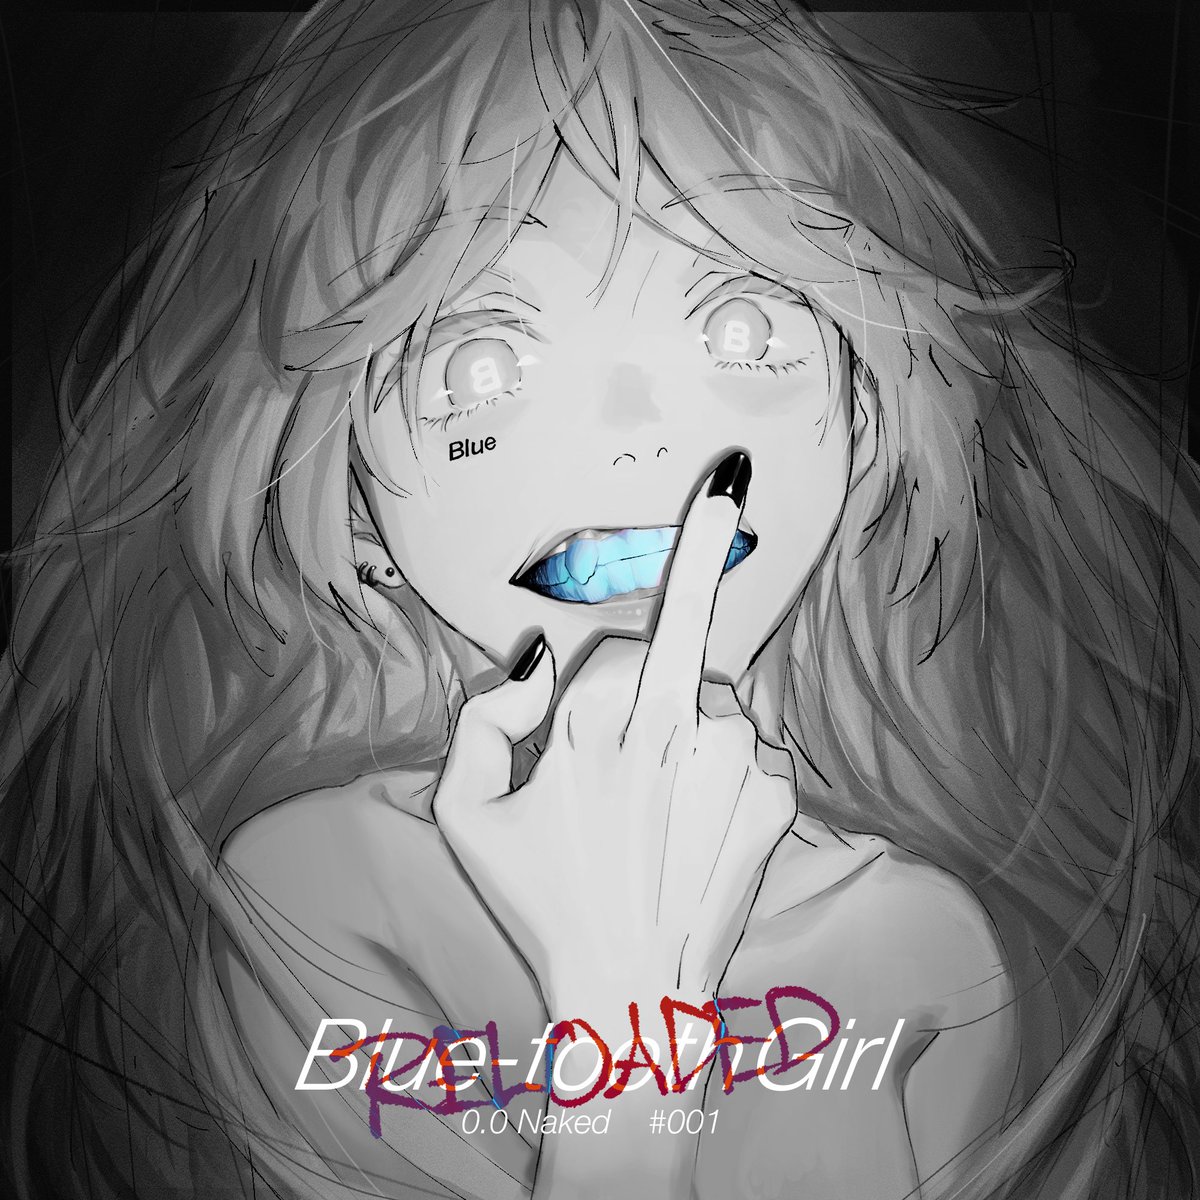 Blue-tooth Girl "RELOADED"
#OC #創作イラスト 